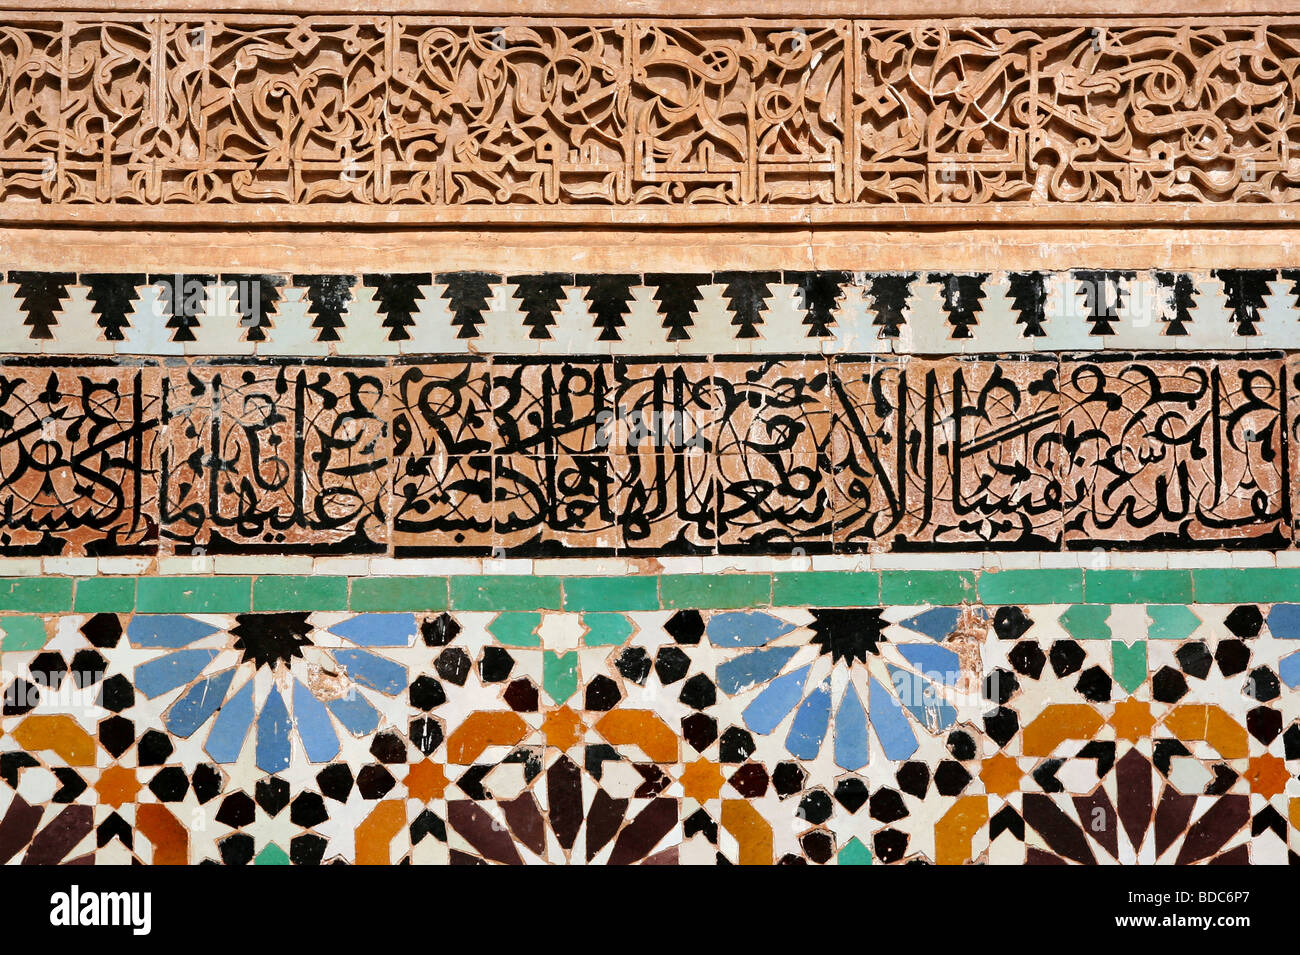 Colorful Islamic tiles, Arabic calligraphy and stucco designs in the